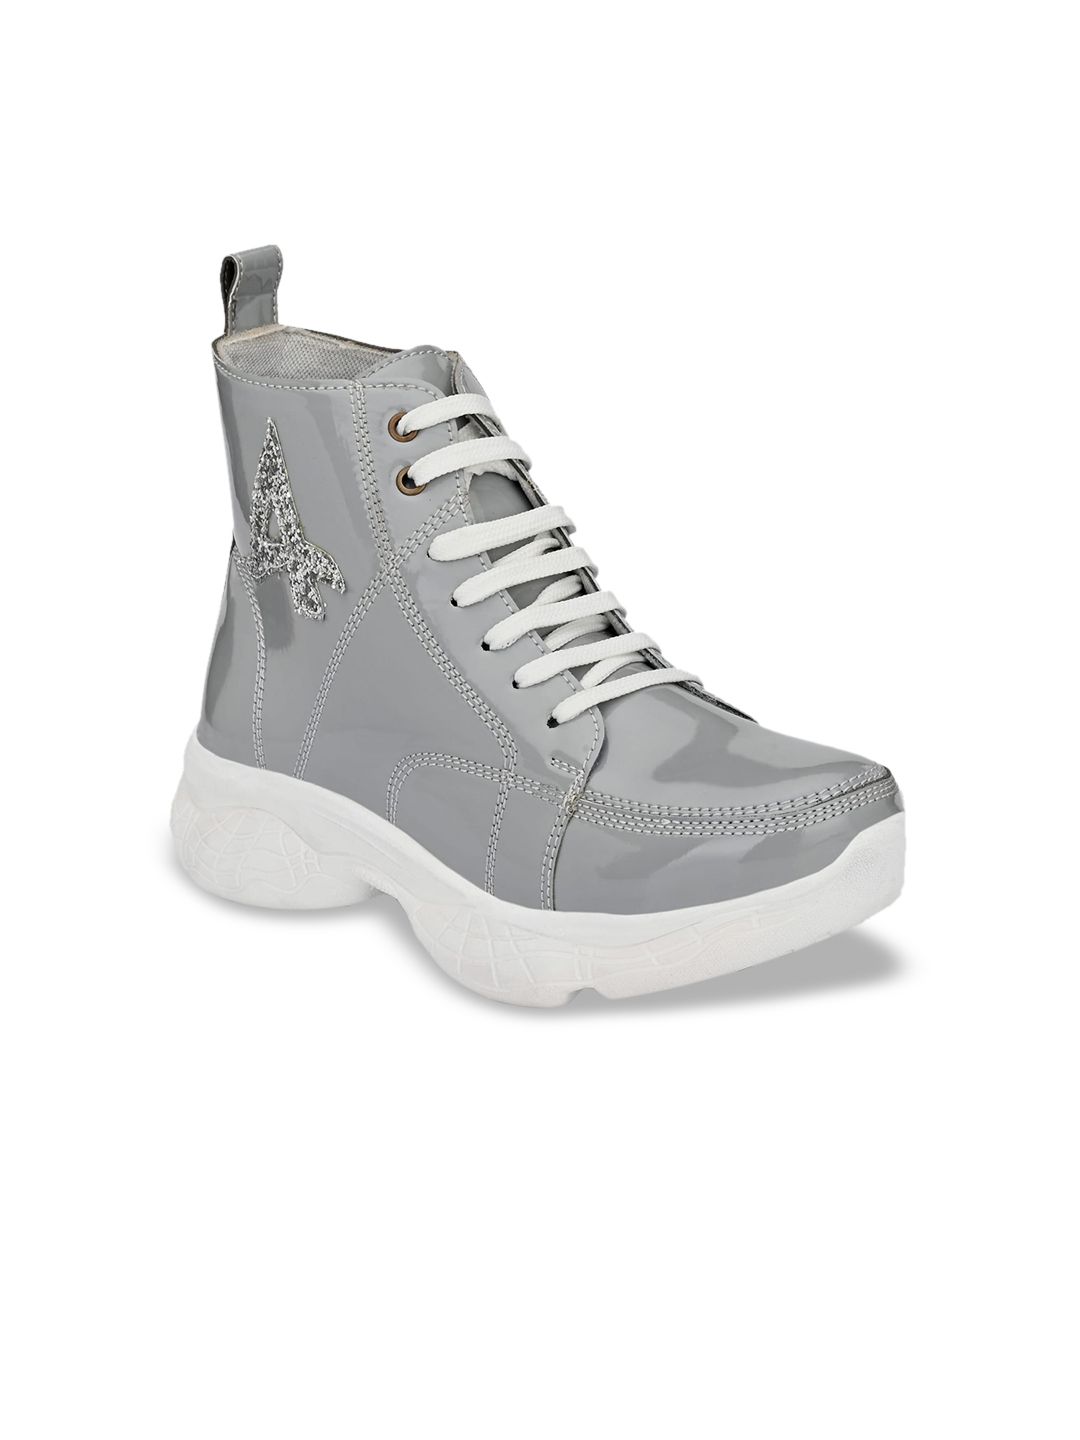 AfroJack Women Grey & Off White Synthetic Leather Mid-Top Sneakers Price in India